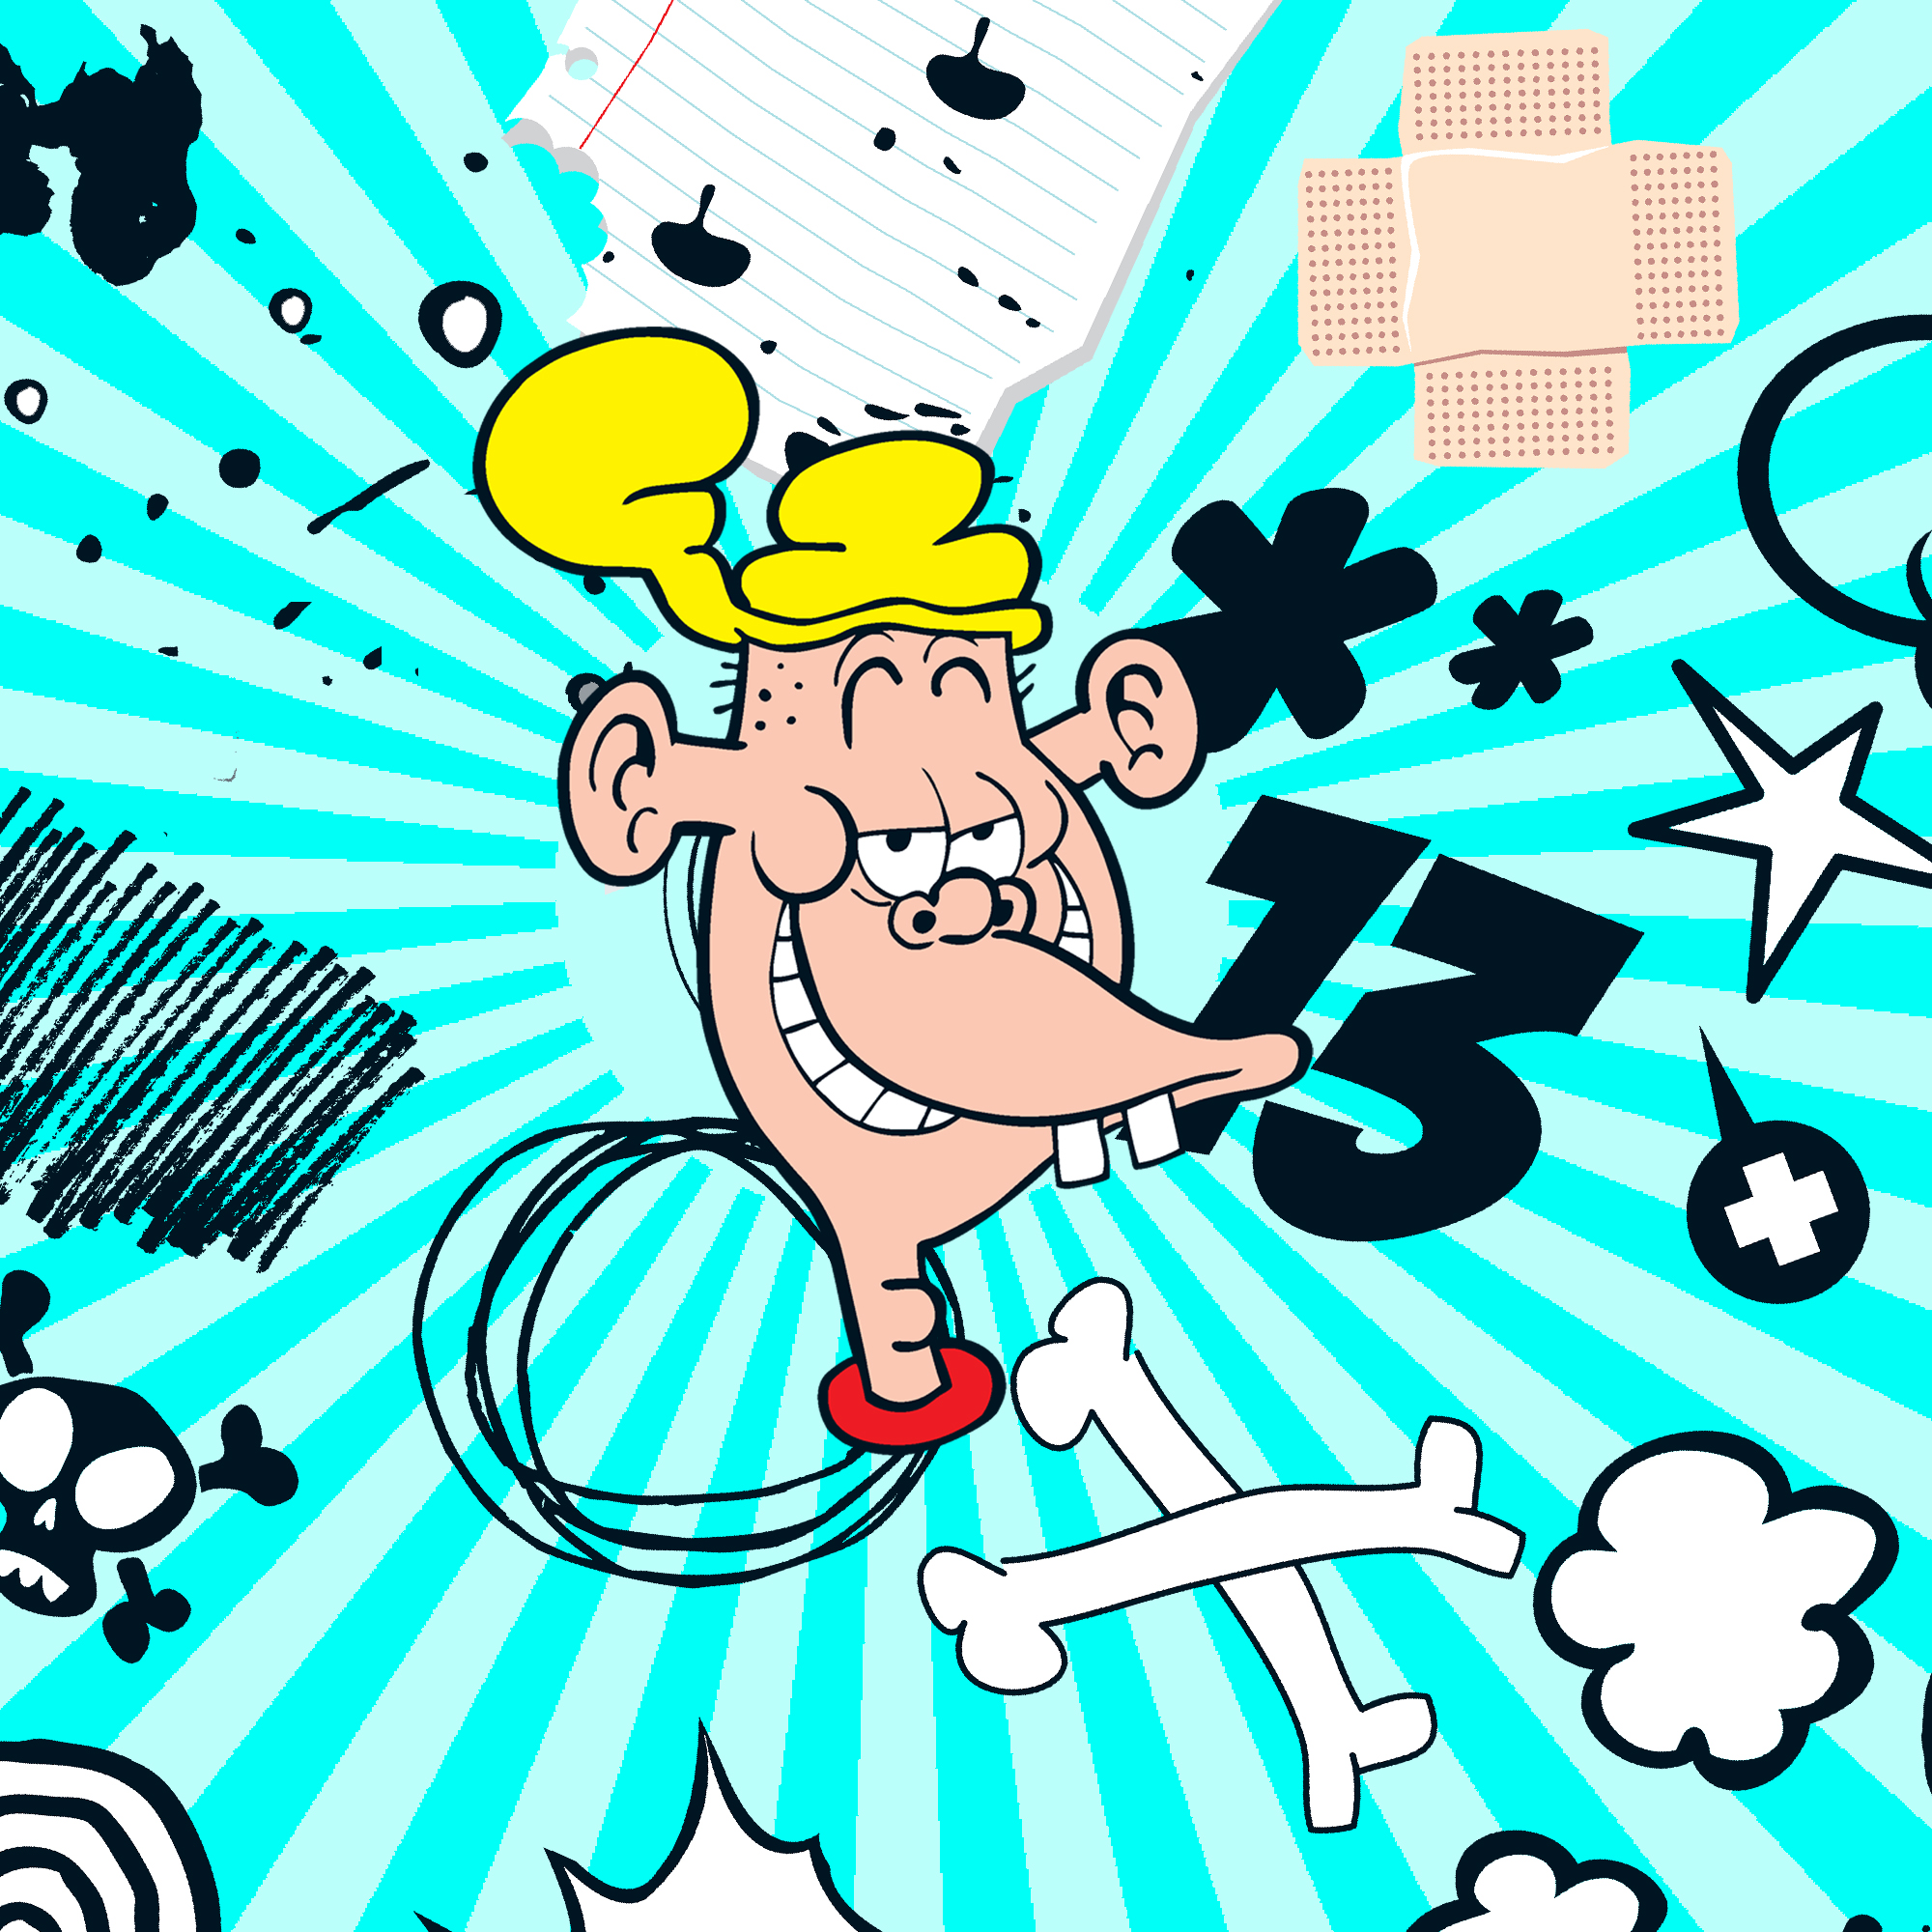 Plug is the most handsome member of Beano's Bash Street Kids